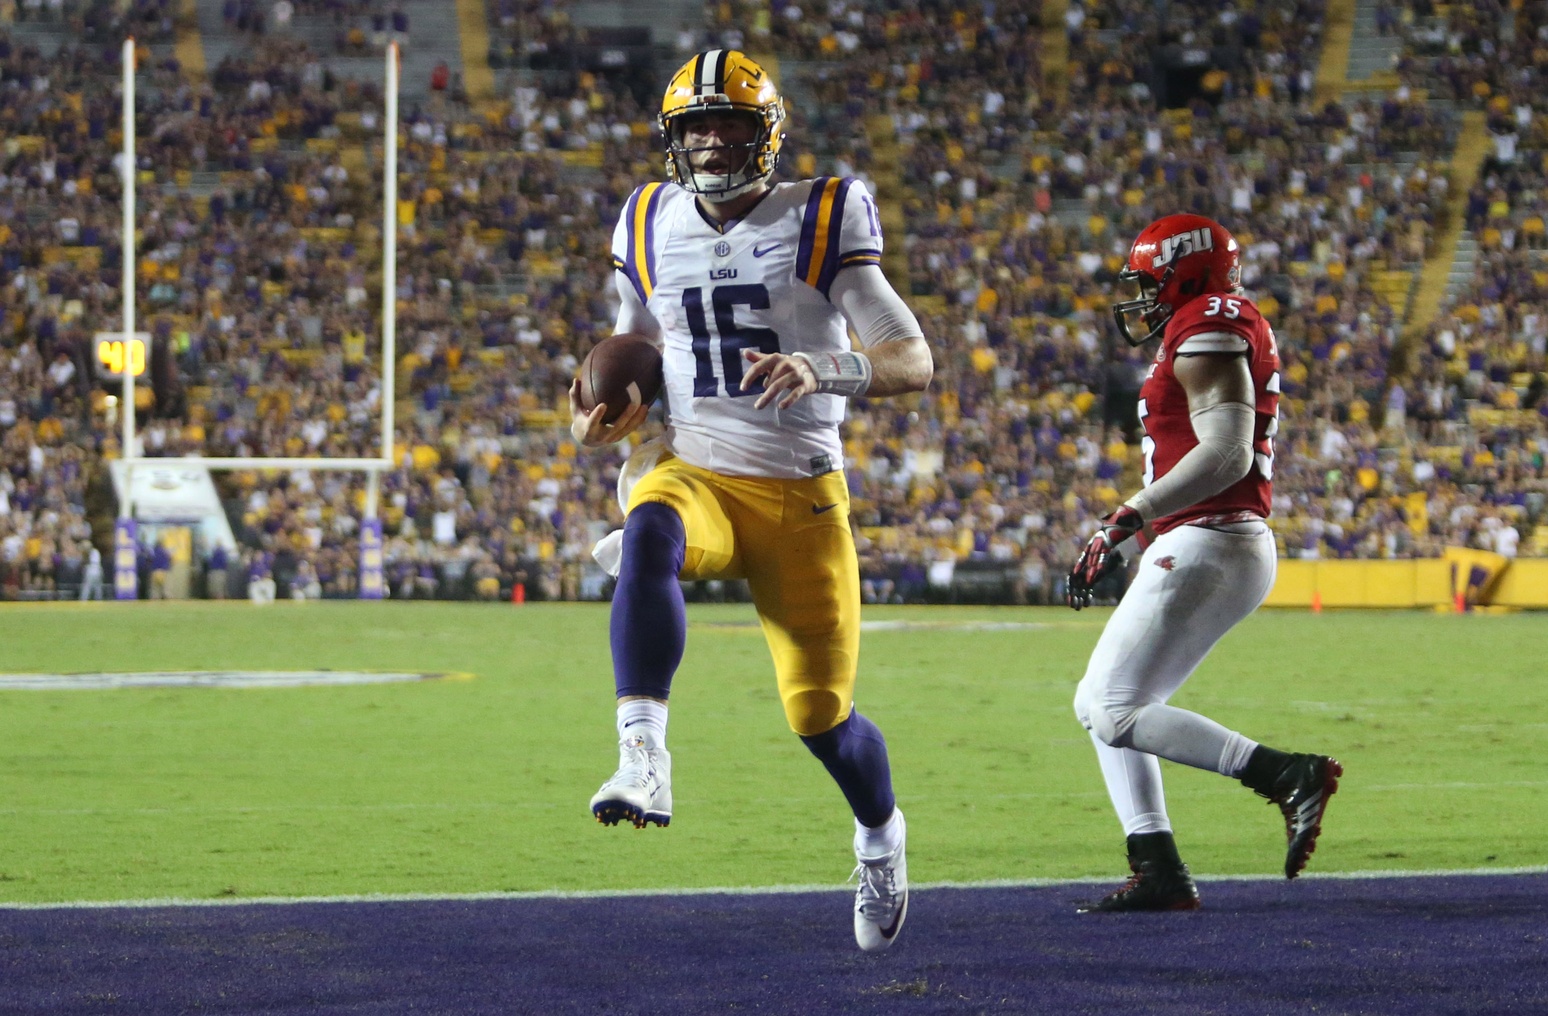 Sep 10, 2016; Baton Rouge, LA, USA; LSU Tigers quarterback Danny Etling (16) runs the ball into the end zone for a touchdown in front of Jacksonville State Gamecocks linebacker Quan Stoudemire (35) during the second half at Tiger Stadium. LSU defeated Jacksonville State 34-13. Mandatory Credit: Crystal LoGiudice-USA TODAY Sports